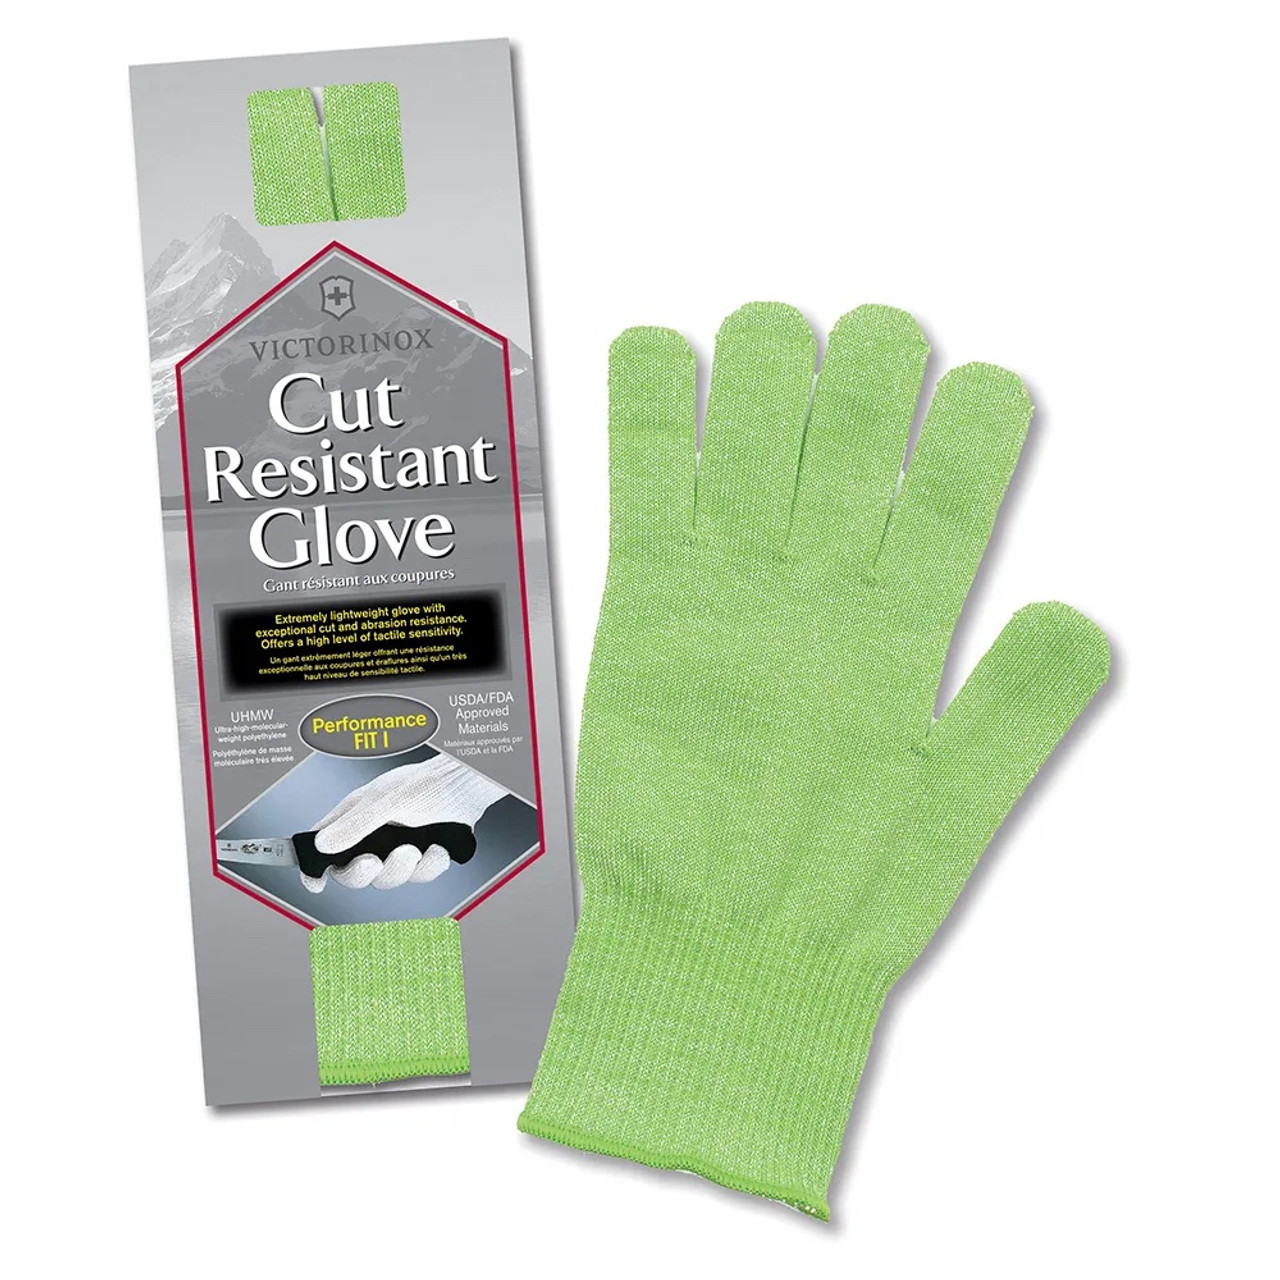 Victorinox - Cut Resistant Glove  "Green" - One Size Fits Most -7.9048.4 